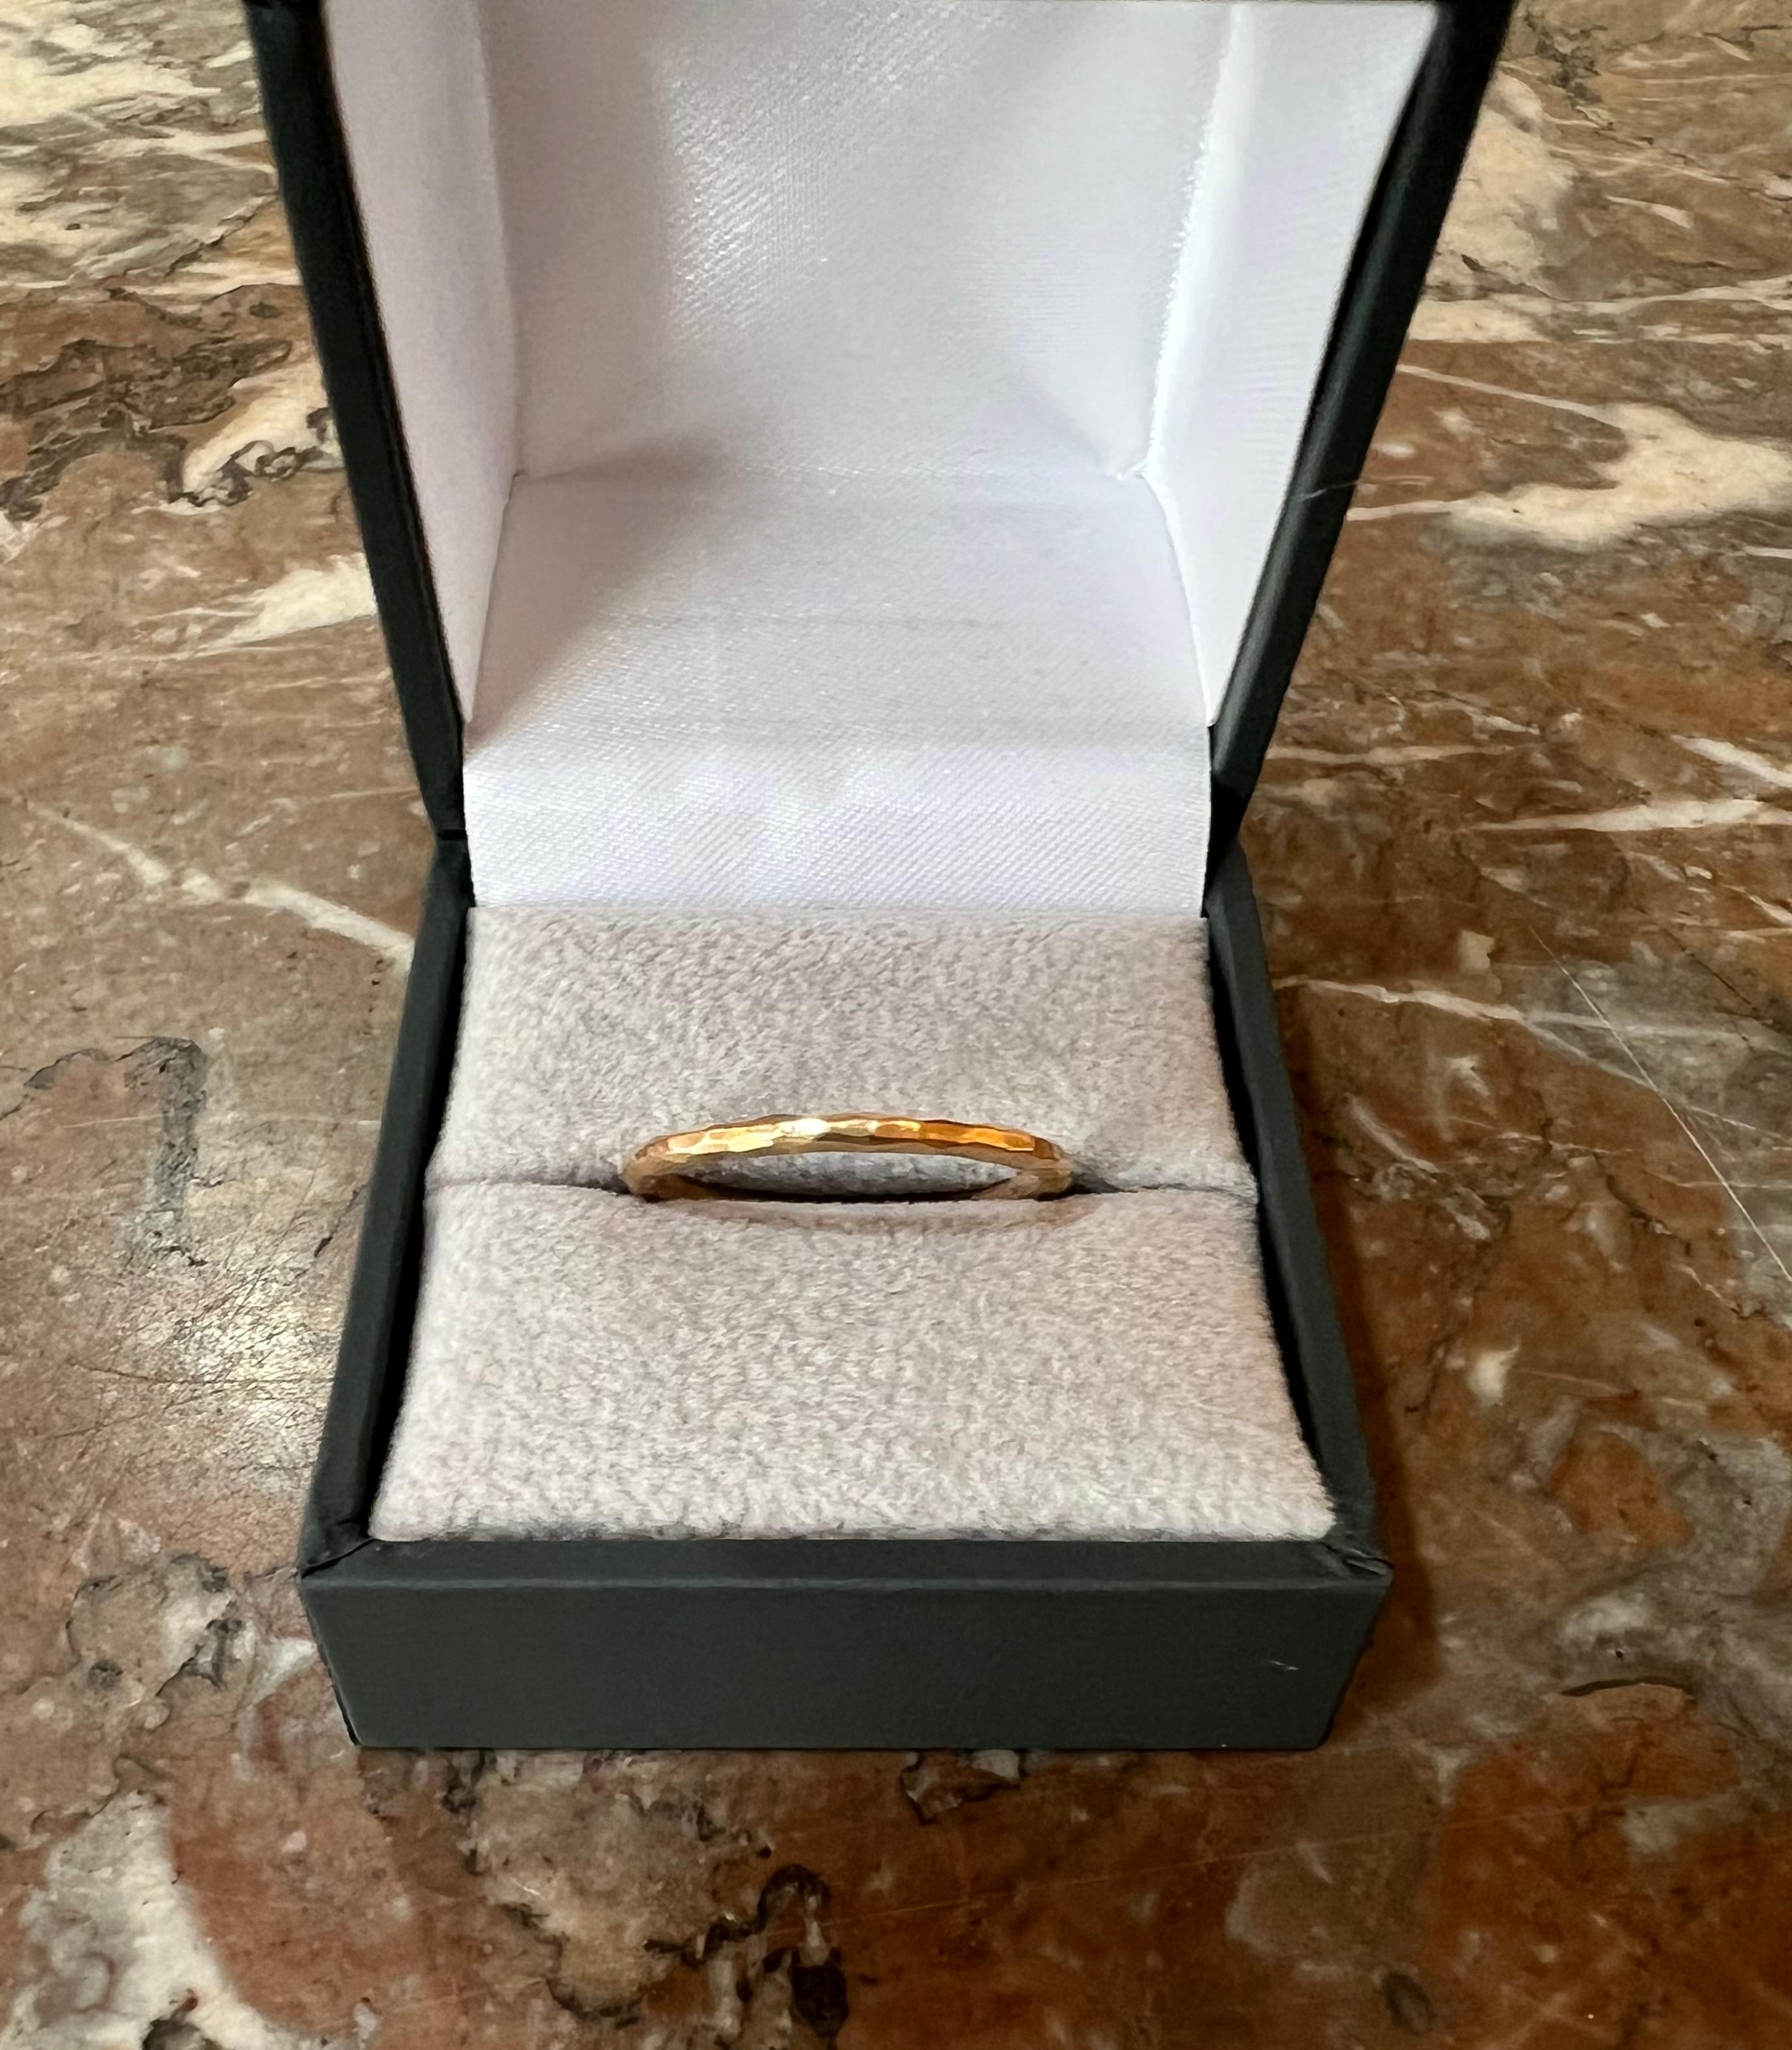 Wedding ring signed Tiffany & Co Paloma Picasso in textured yellow gold.

Dimensions: 1.66 x 1.84 mm (0.065 x 0.072 inch)

Finger size: 55.5 (US : 7 1/4)

Ring weight: 2.2 g

Italian work circa 2010

18 carat yellow gold, 750/1000th

Although we